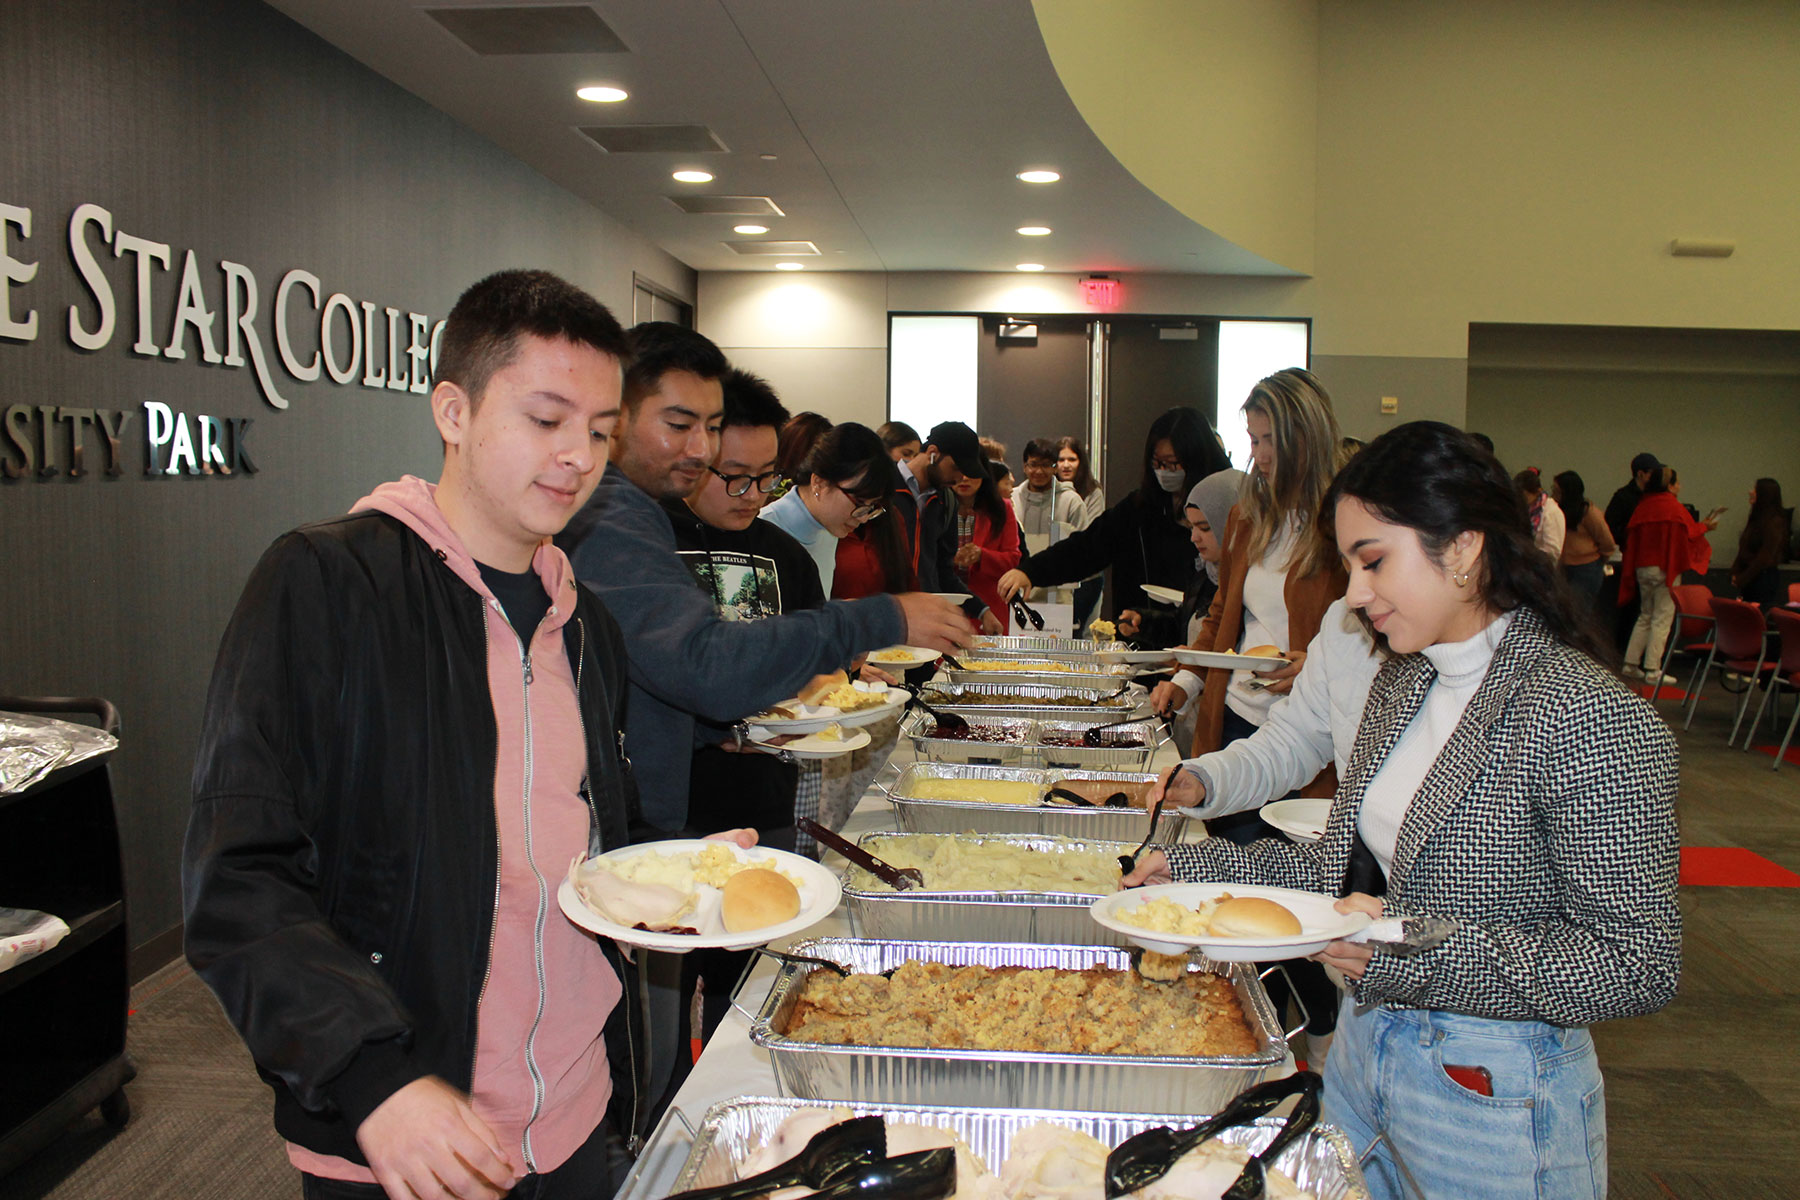 ESOL Students Serving Thanksgiving Food in Buffet Line